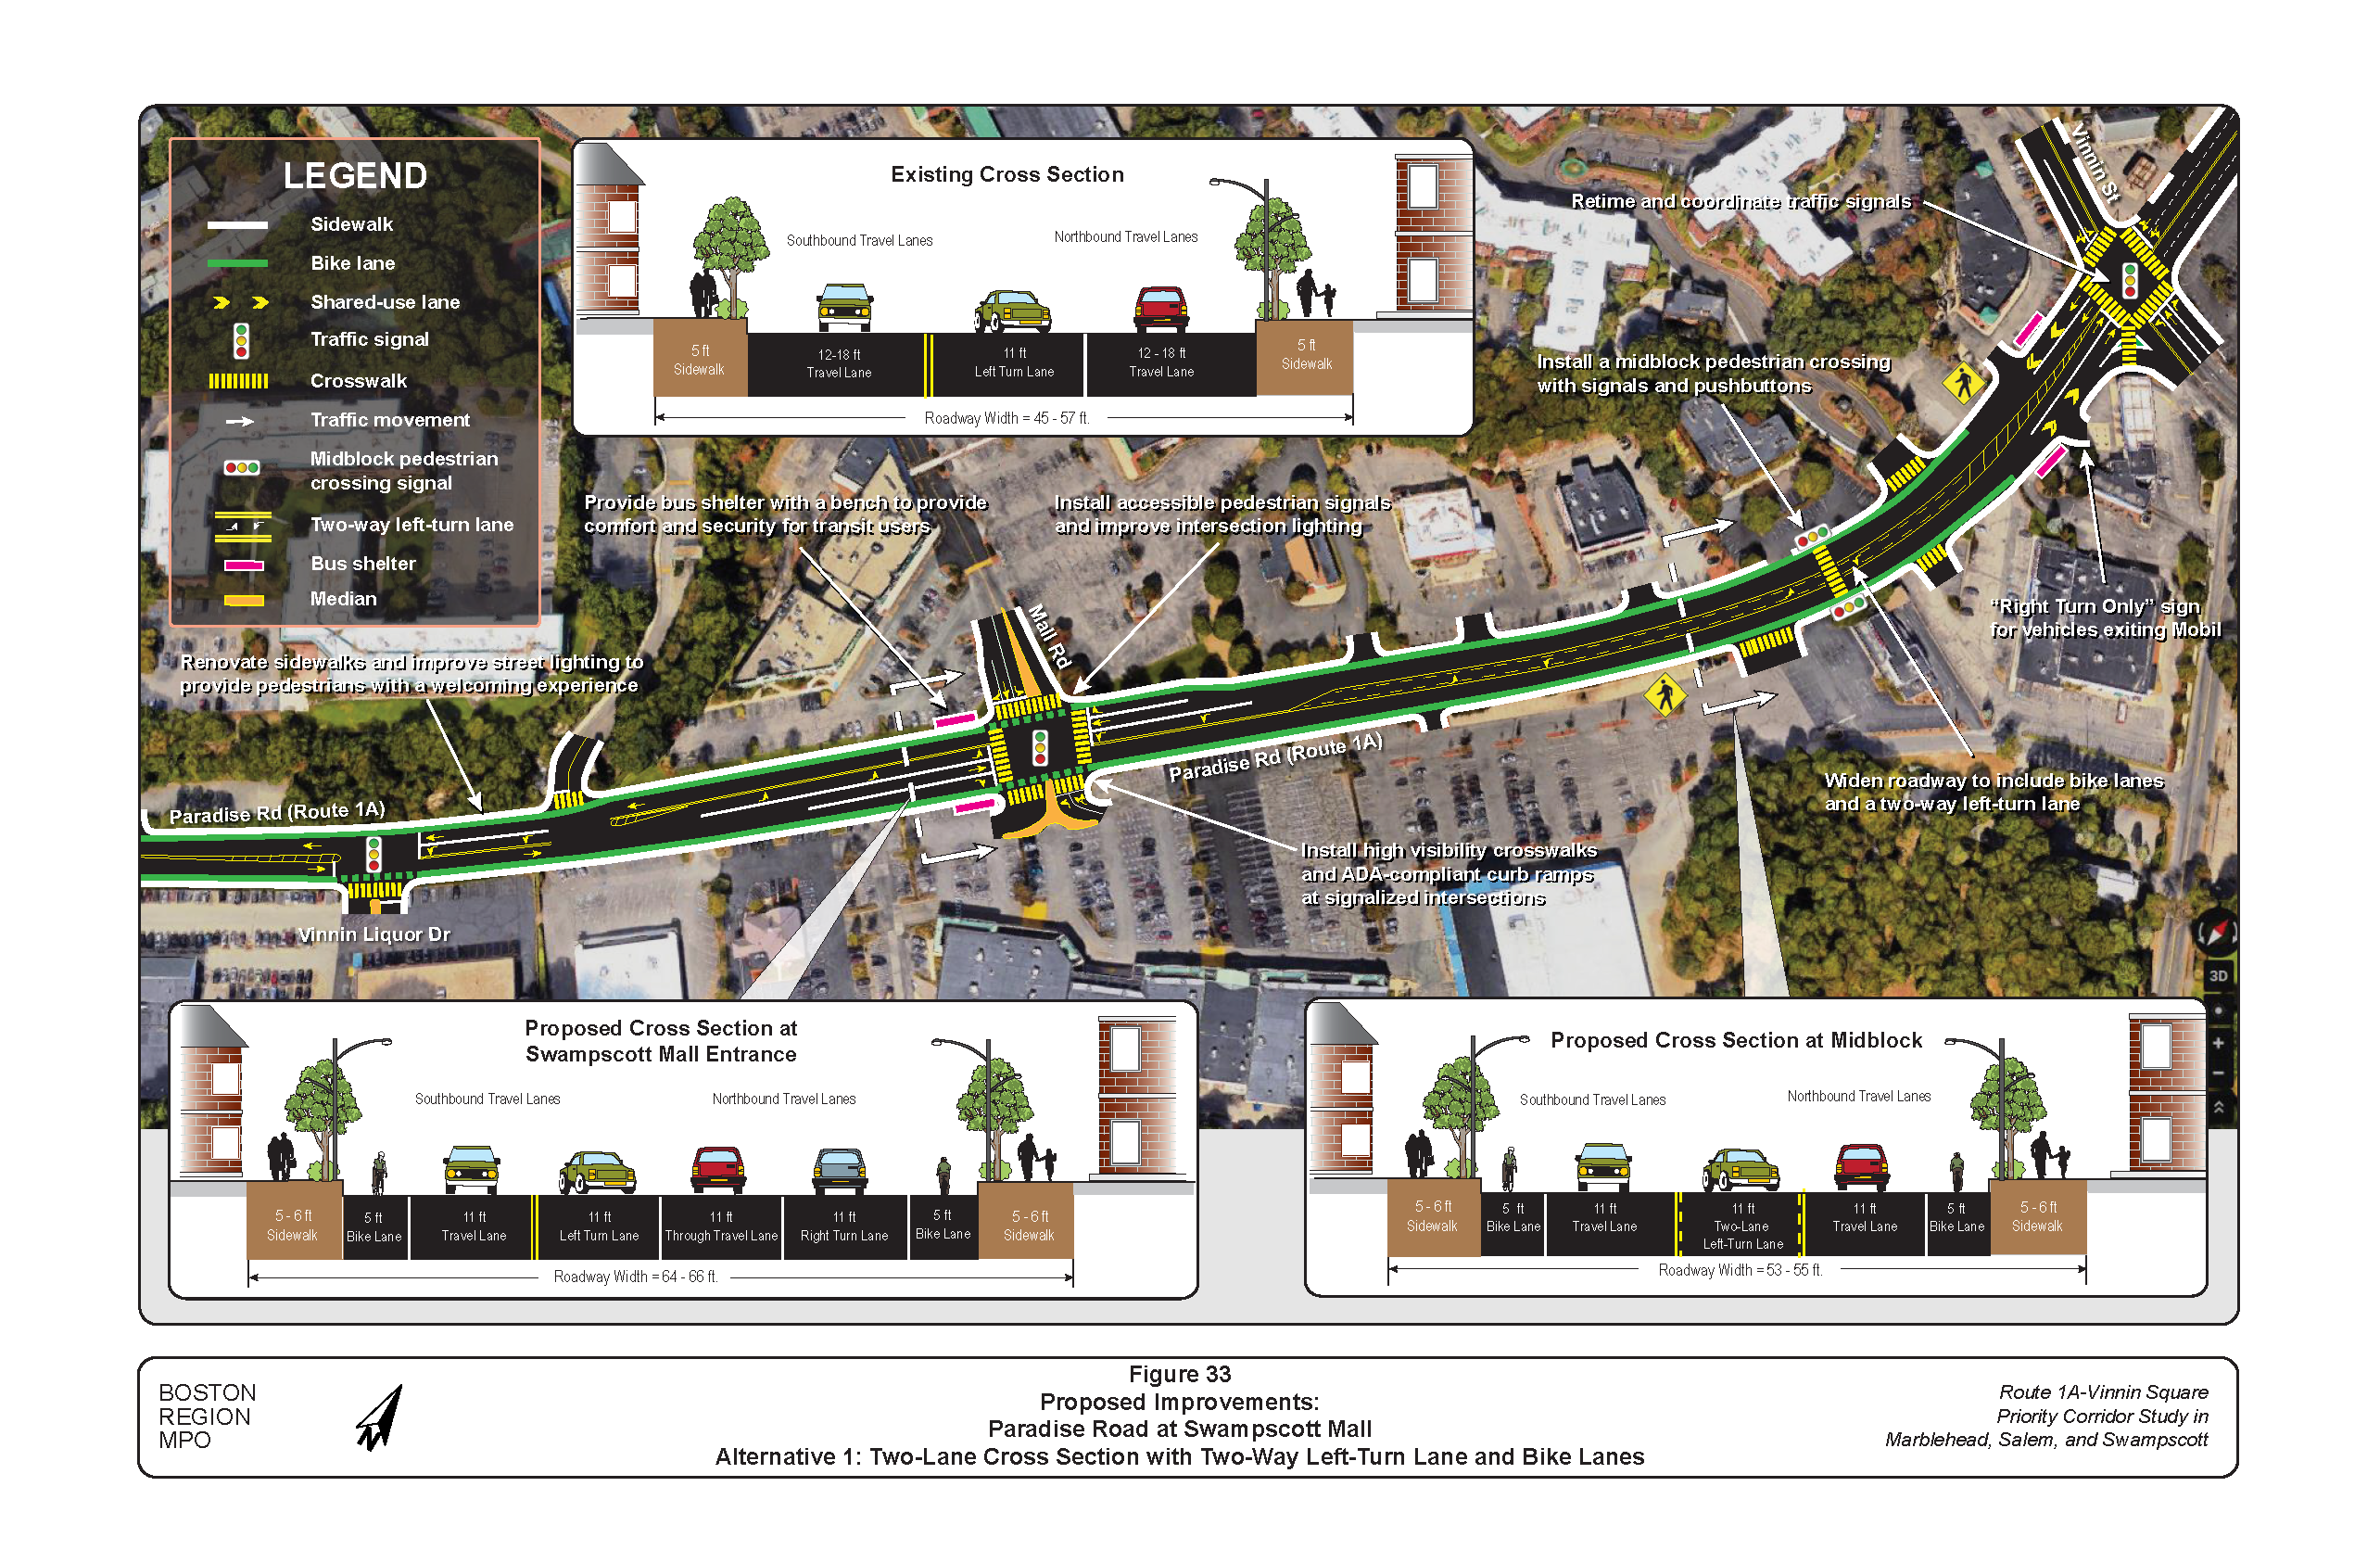 FIGURE 33. Proposed Improvements, Alternative 1: Paradise Road at Swampscott Mall.Figure 33 is a map of Paradise Road at Swampscott Mall showing the location of proposed improvements in Alternative 1. The proposed improvements are described in text boxes. Graphics embedded show proposed roadway cross sections with lane widths.